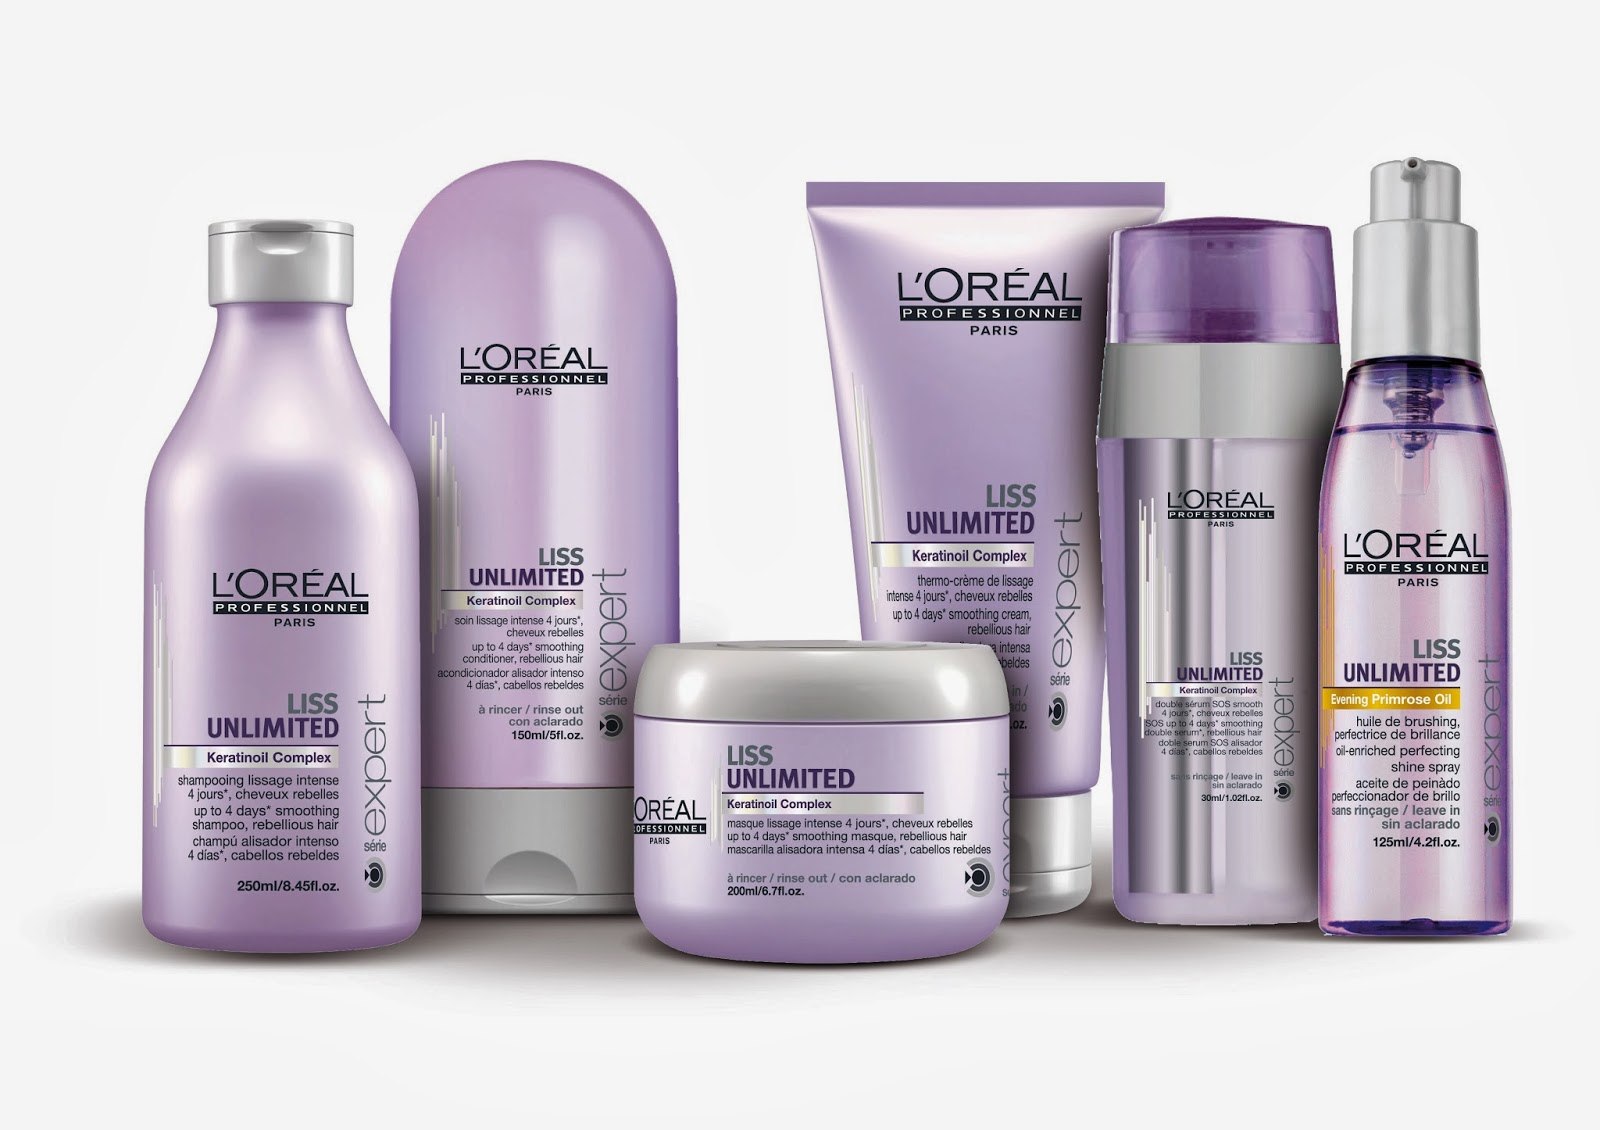 L oreal professionnel liss. Liss Unlimited от l'Oreal Professionnel. Loreal Liss Unlimited. Liss Unlimited от l’Oréal Professionnel. L’Oreal Professionnel Liss Unlimited Conditioner 150 мл Wildberries.